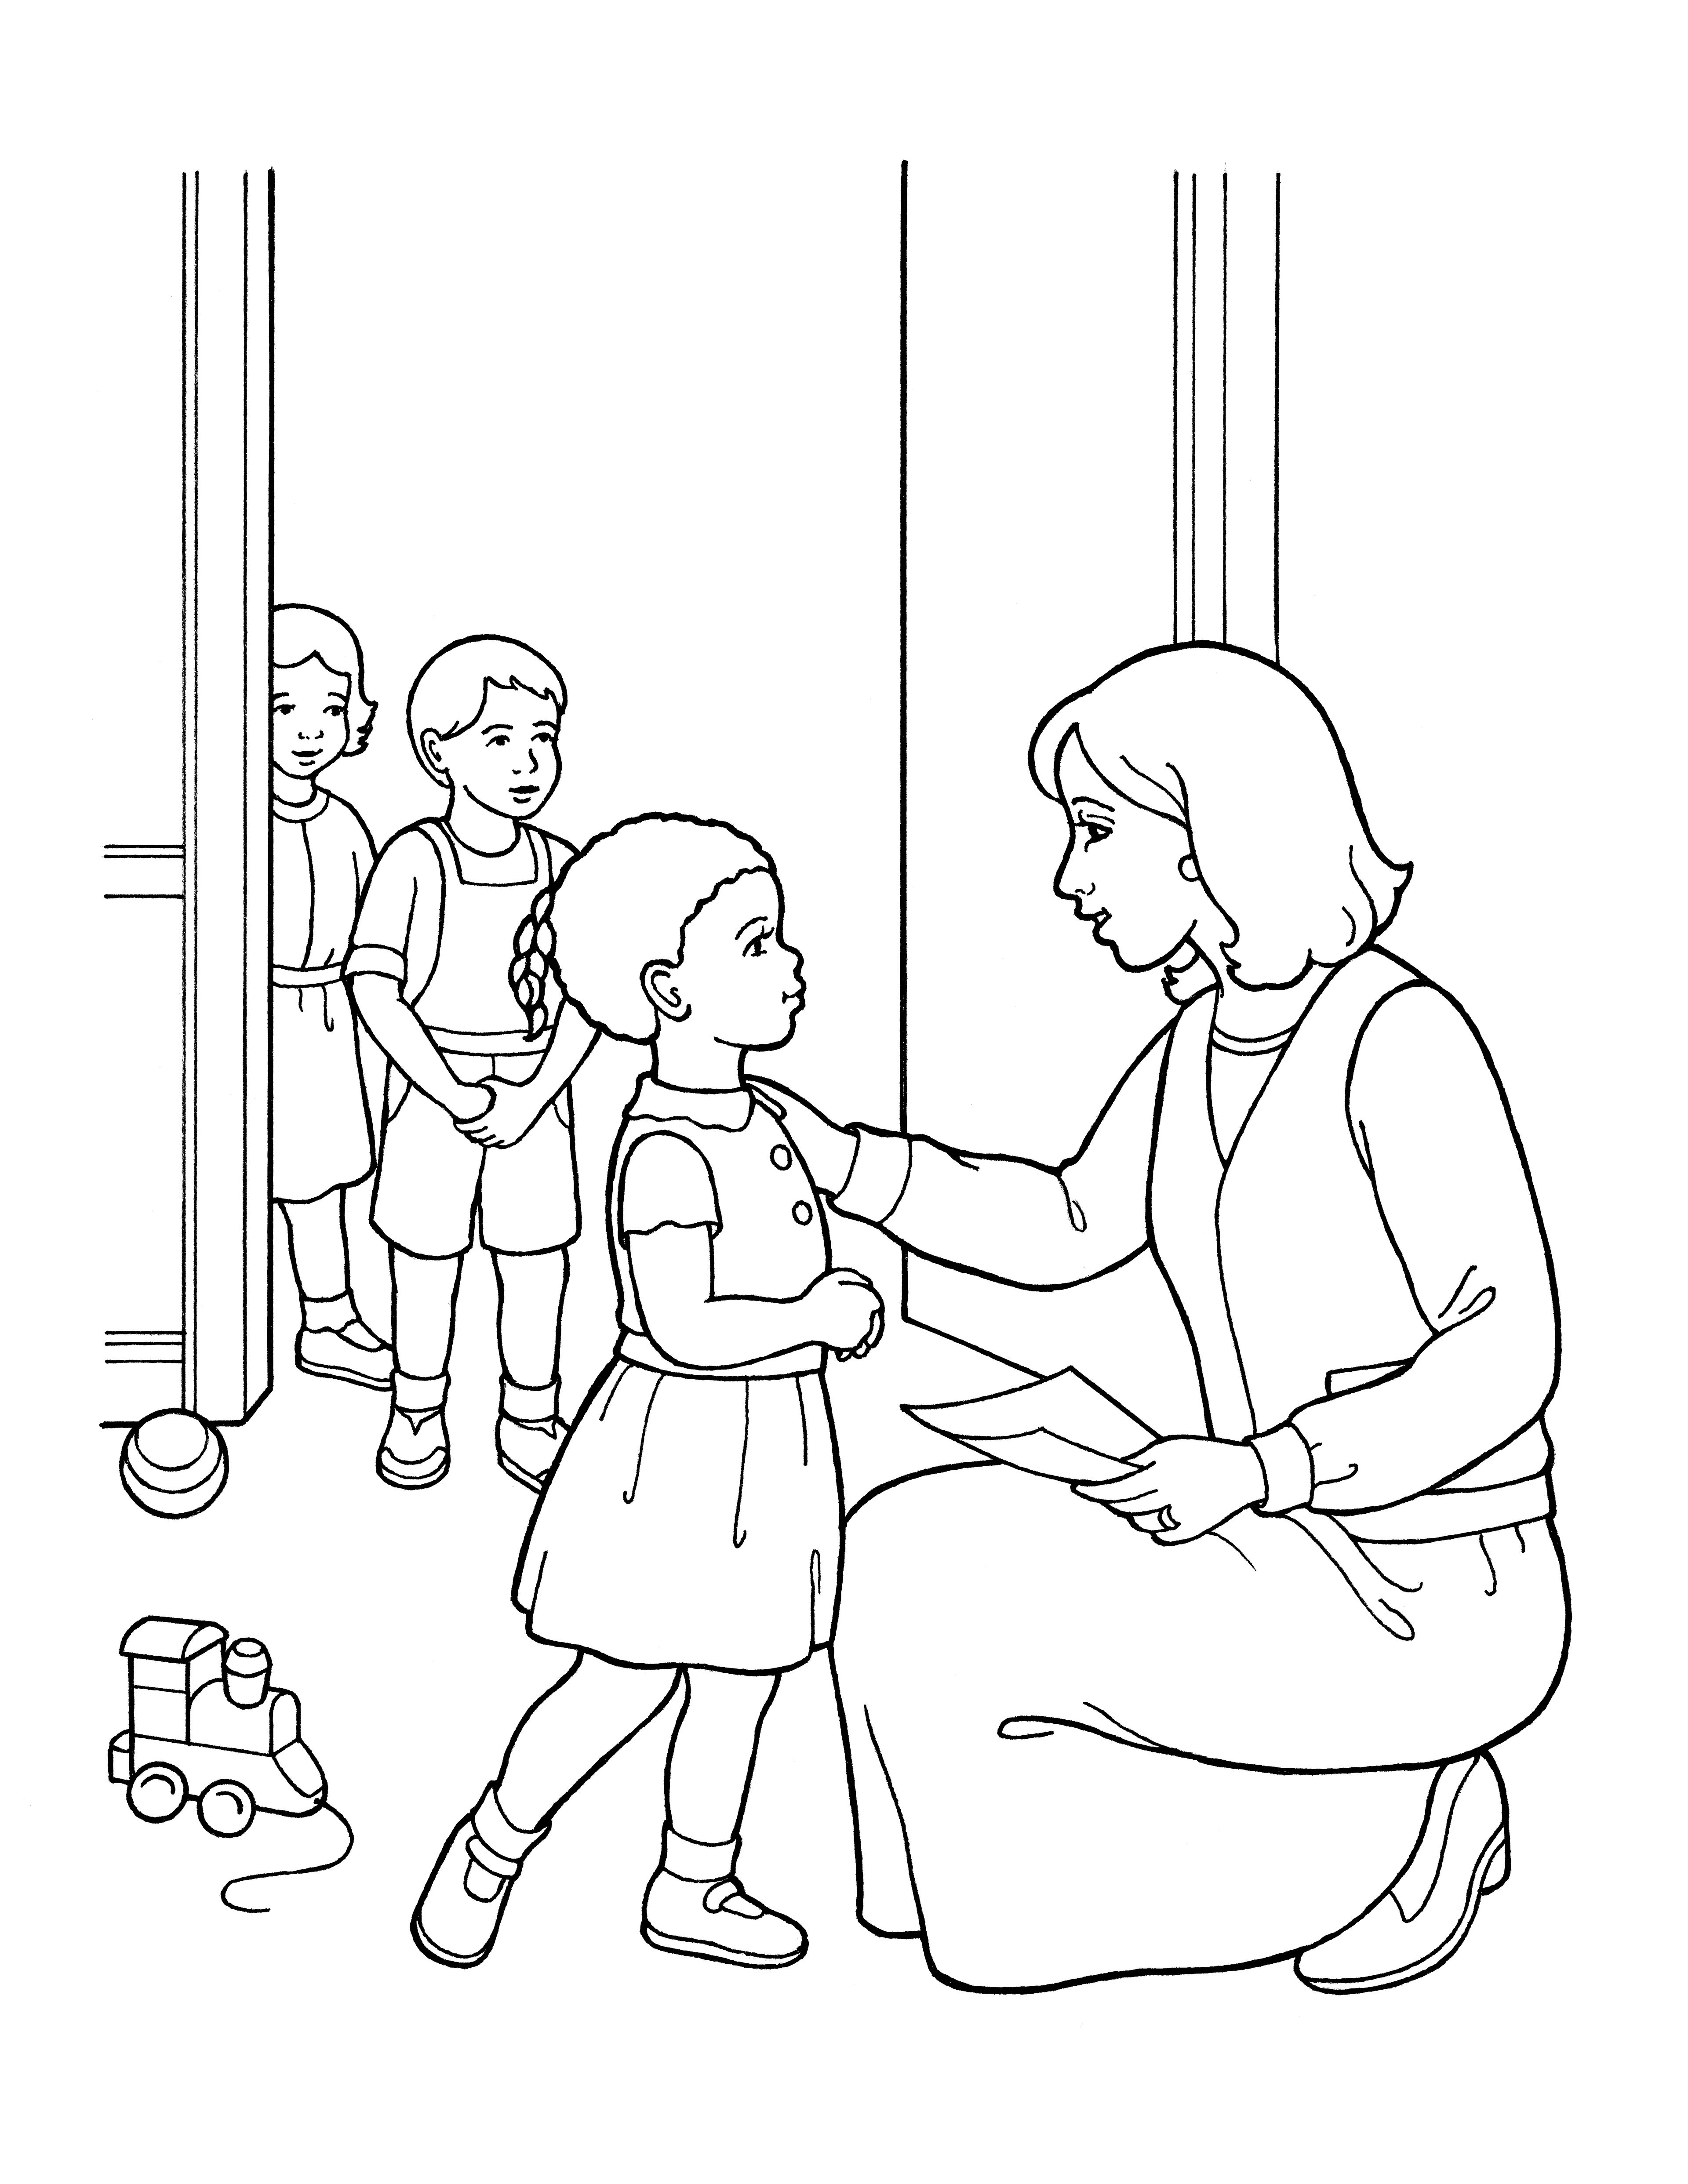 An illustration of a nursery leader welcoming the little children into the nursery classroom.